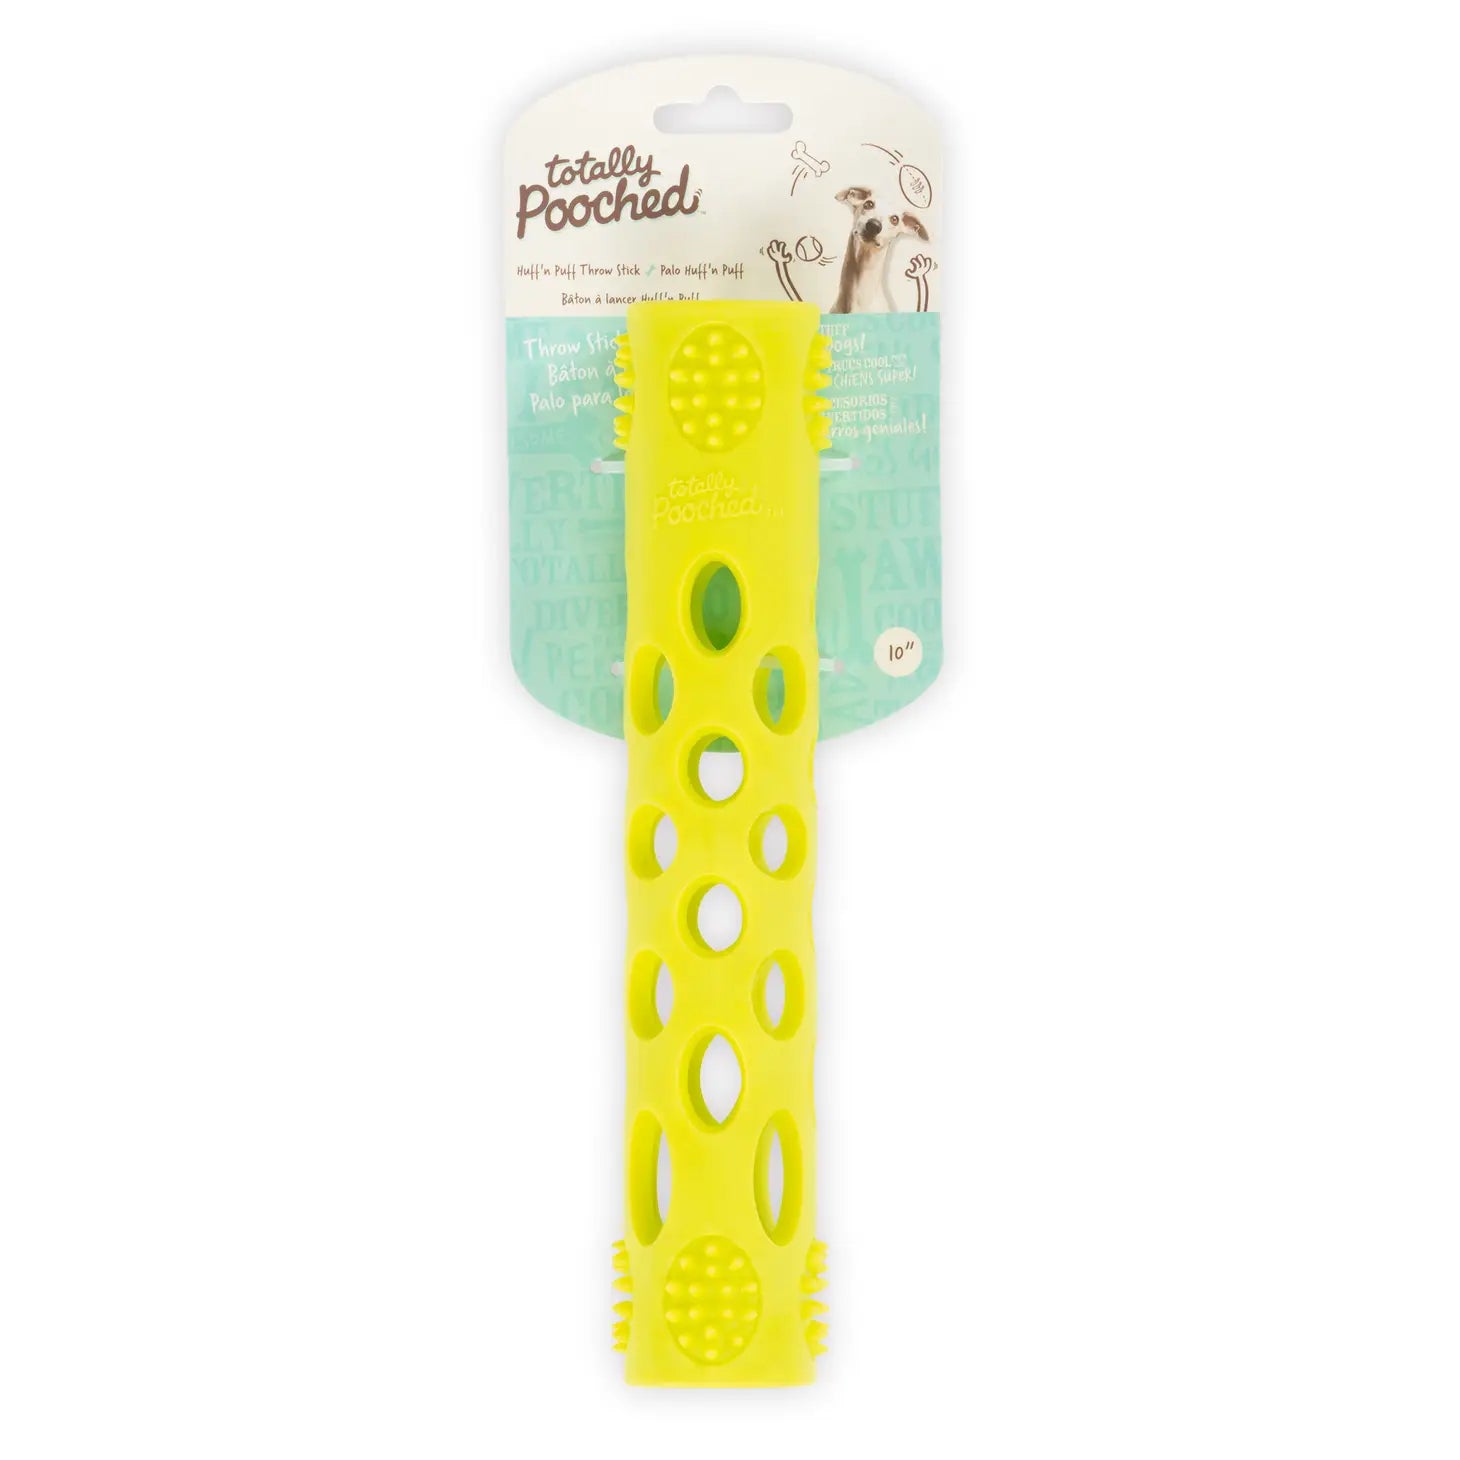 Bright green Huff'n Puff Throw Stick dog toy and its packaging